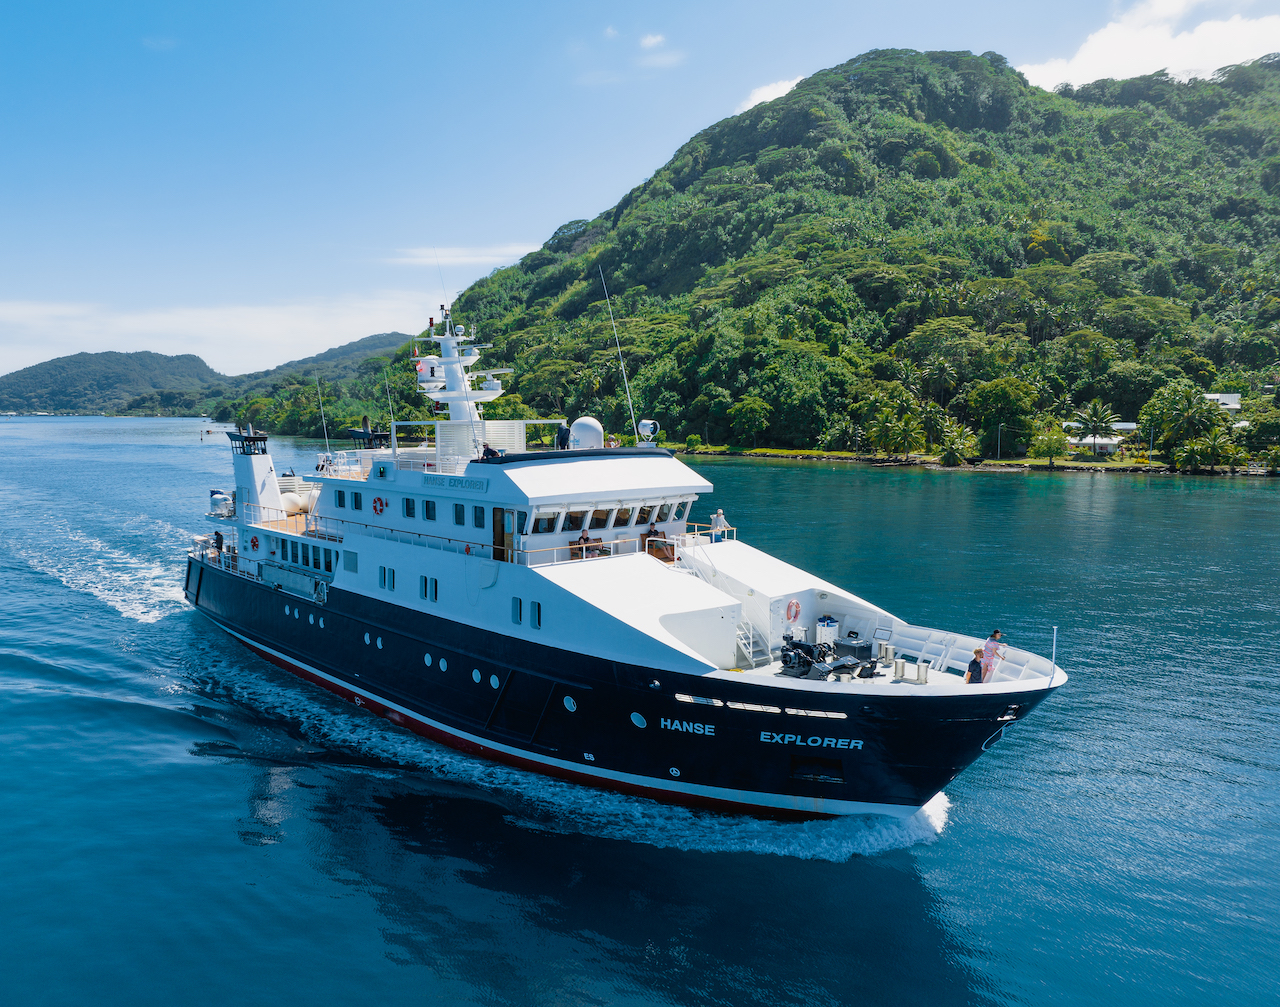 EYOS, the leader in superyacht expedition charters, announces Hanse Explorer will be available for charter in Melanesia from May to September 2024.